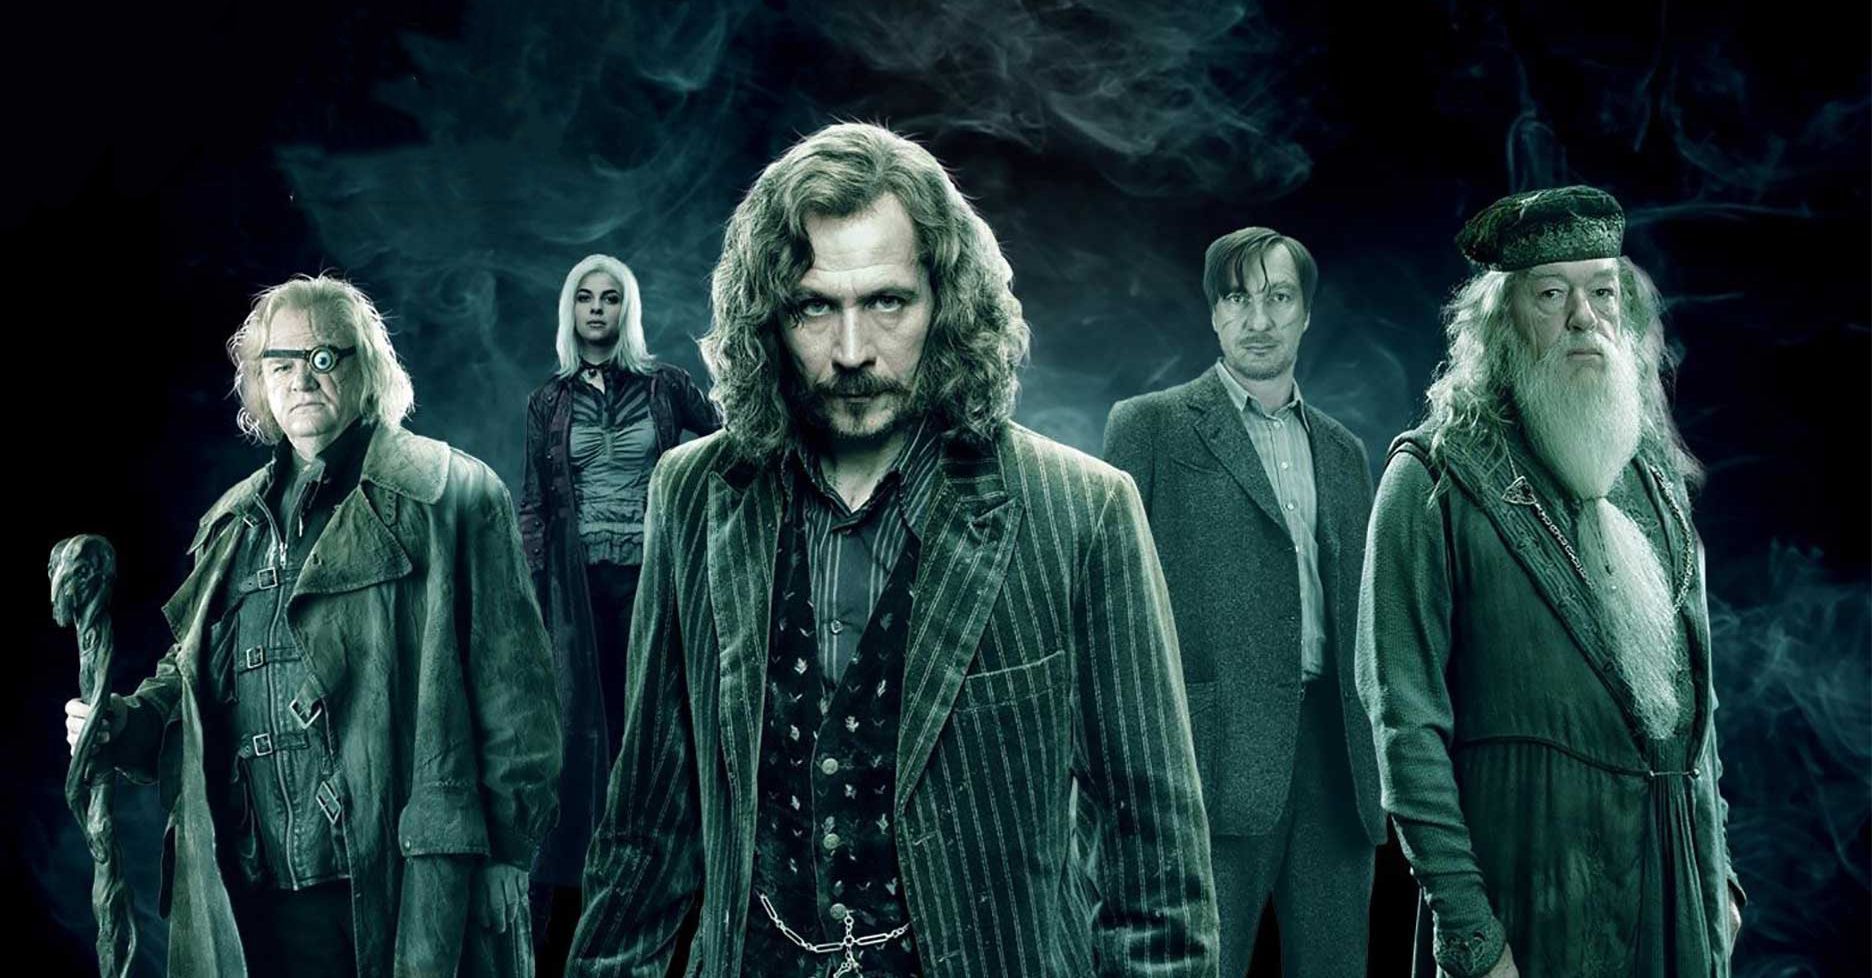 The second line-up of the Order of the Phoenix staring at the camera in a promo image for Harry Potter and the Order of the Phoenix.